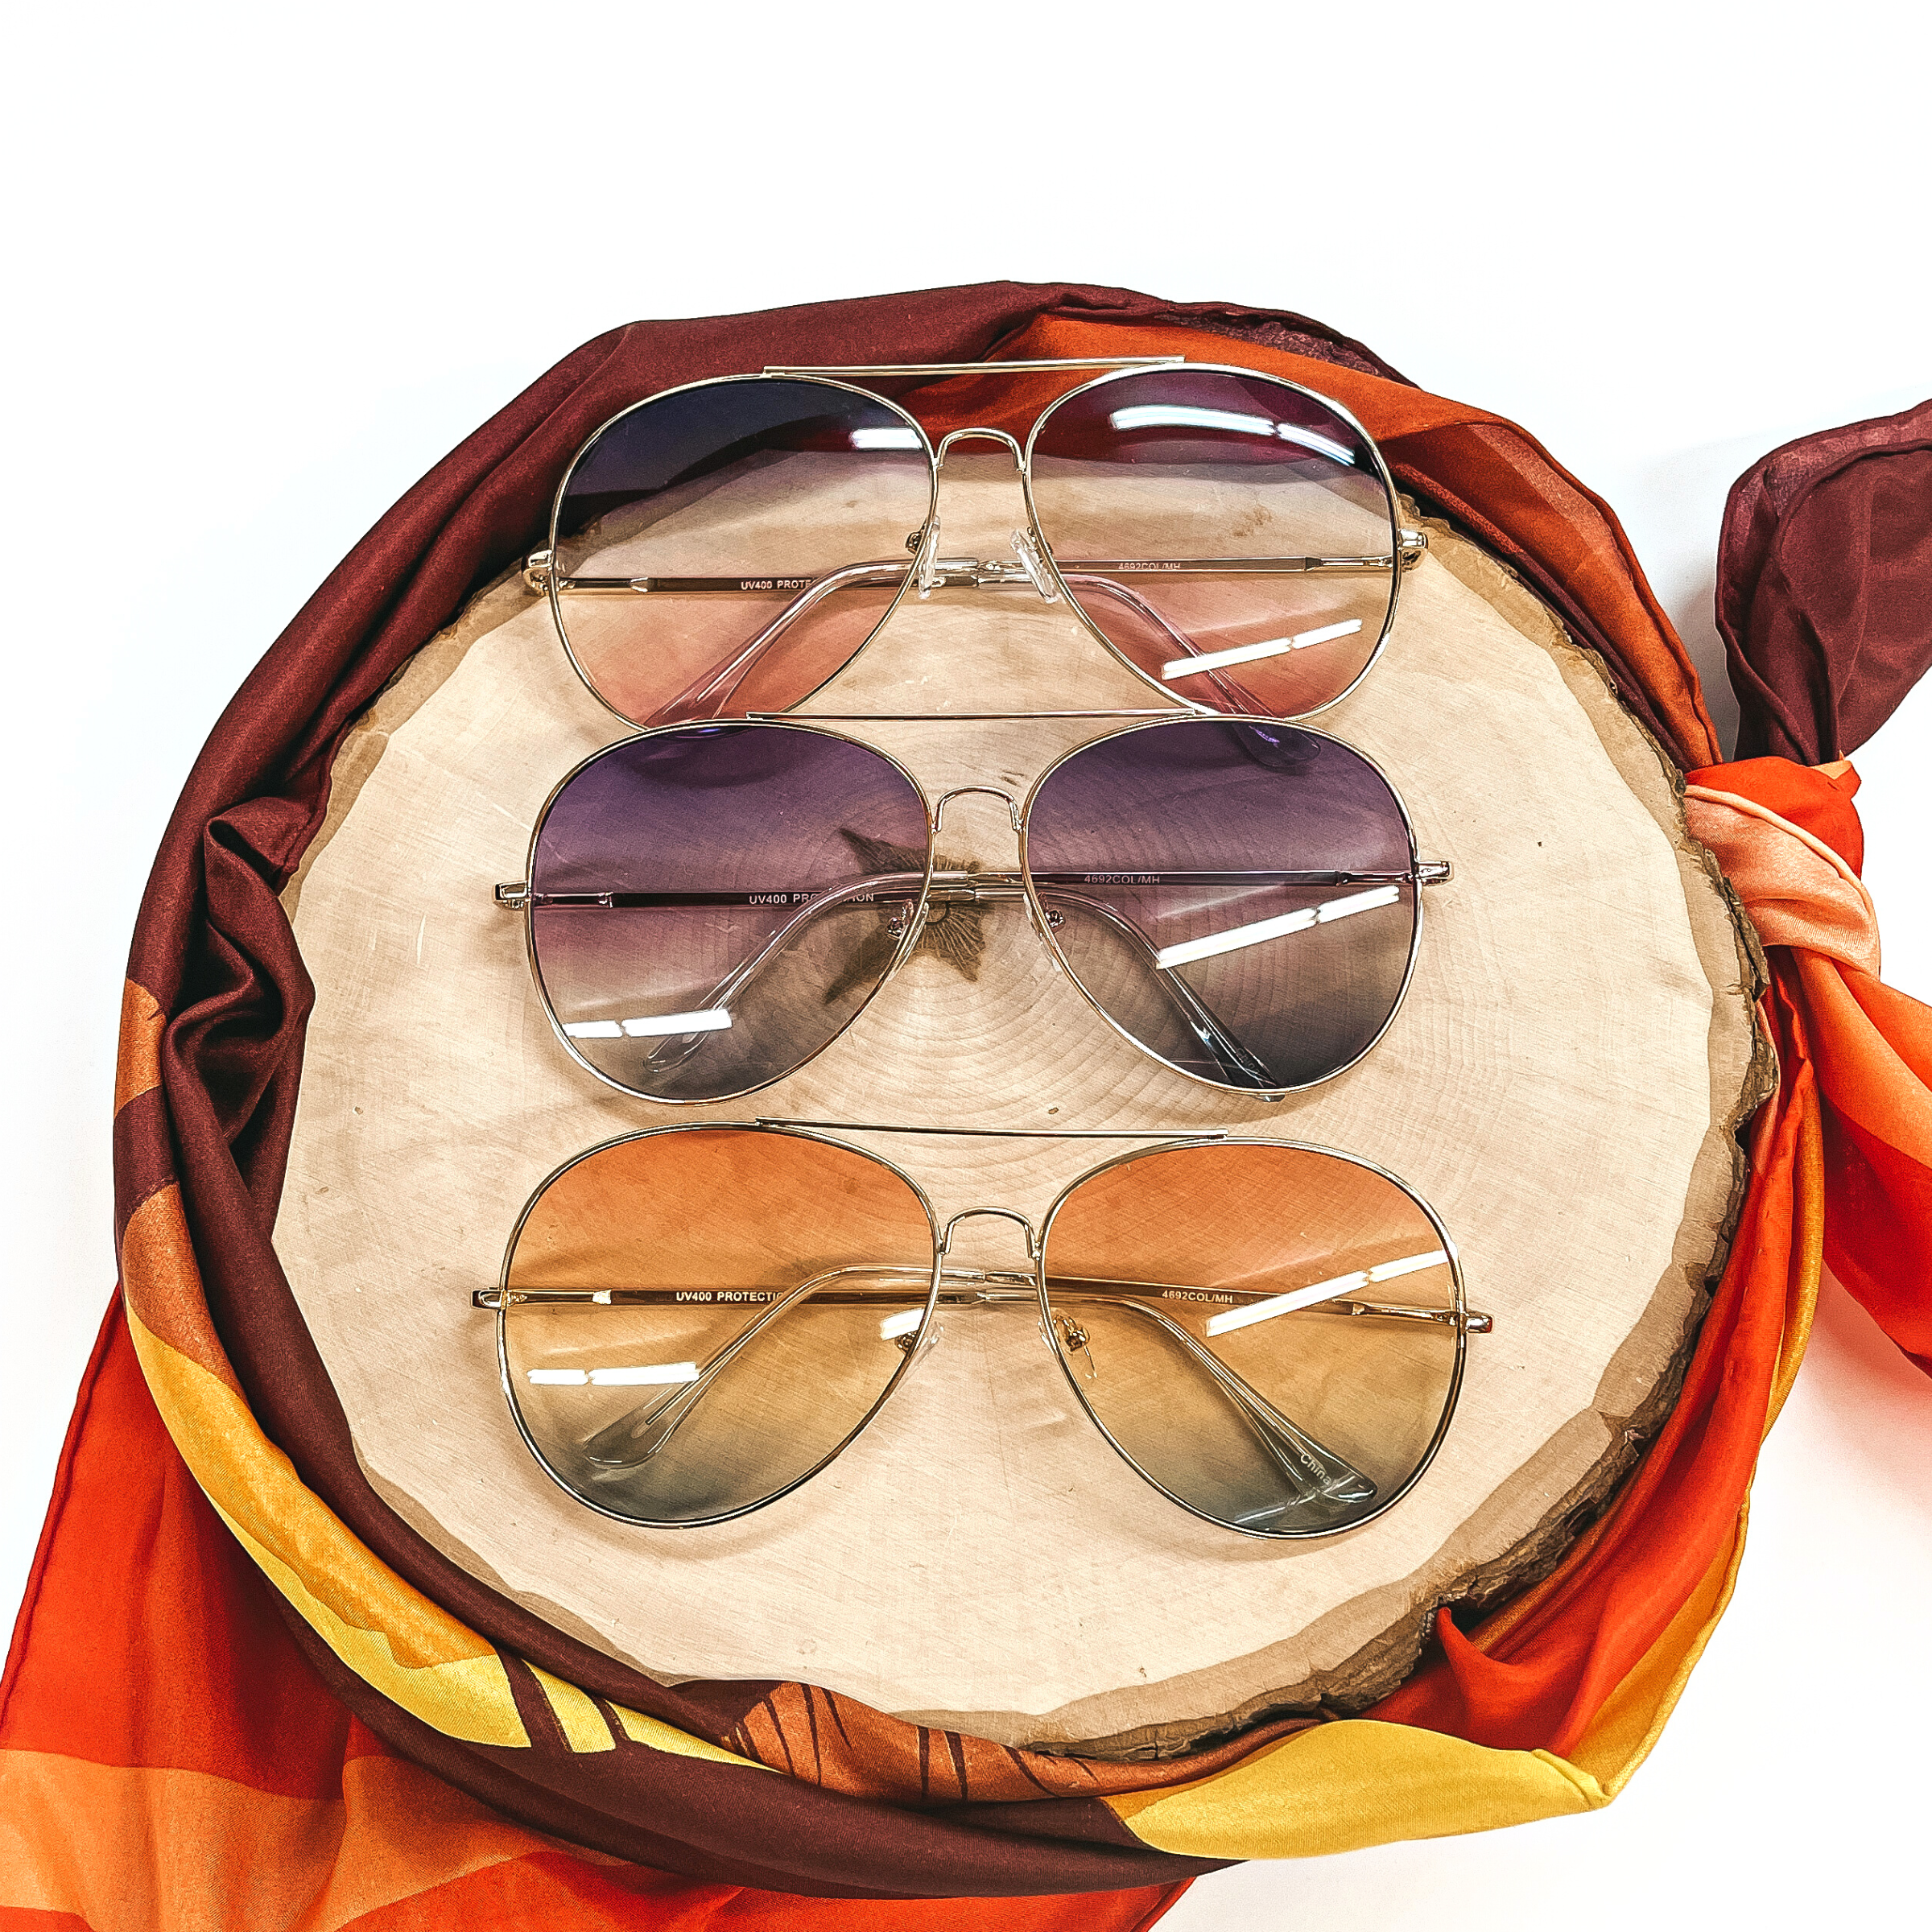 There are three pairs of aviator style sunglasses in different lense colors. From top to bottom; dark blue and pink gradient lenses, dark purple and blue lenses, and coral/orange and green lenses. All sunglasses have a gold tone outline/frame. These sunglasses are taken  on top of a wooden slate with an orange,yellow, and brown wild rag around.